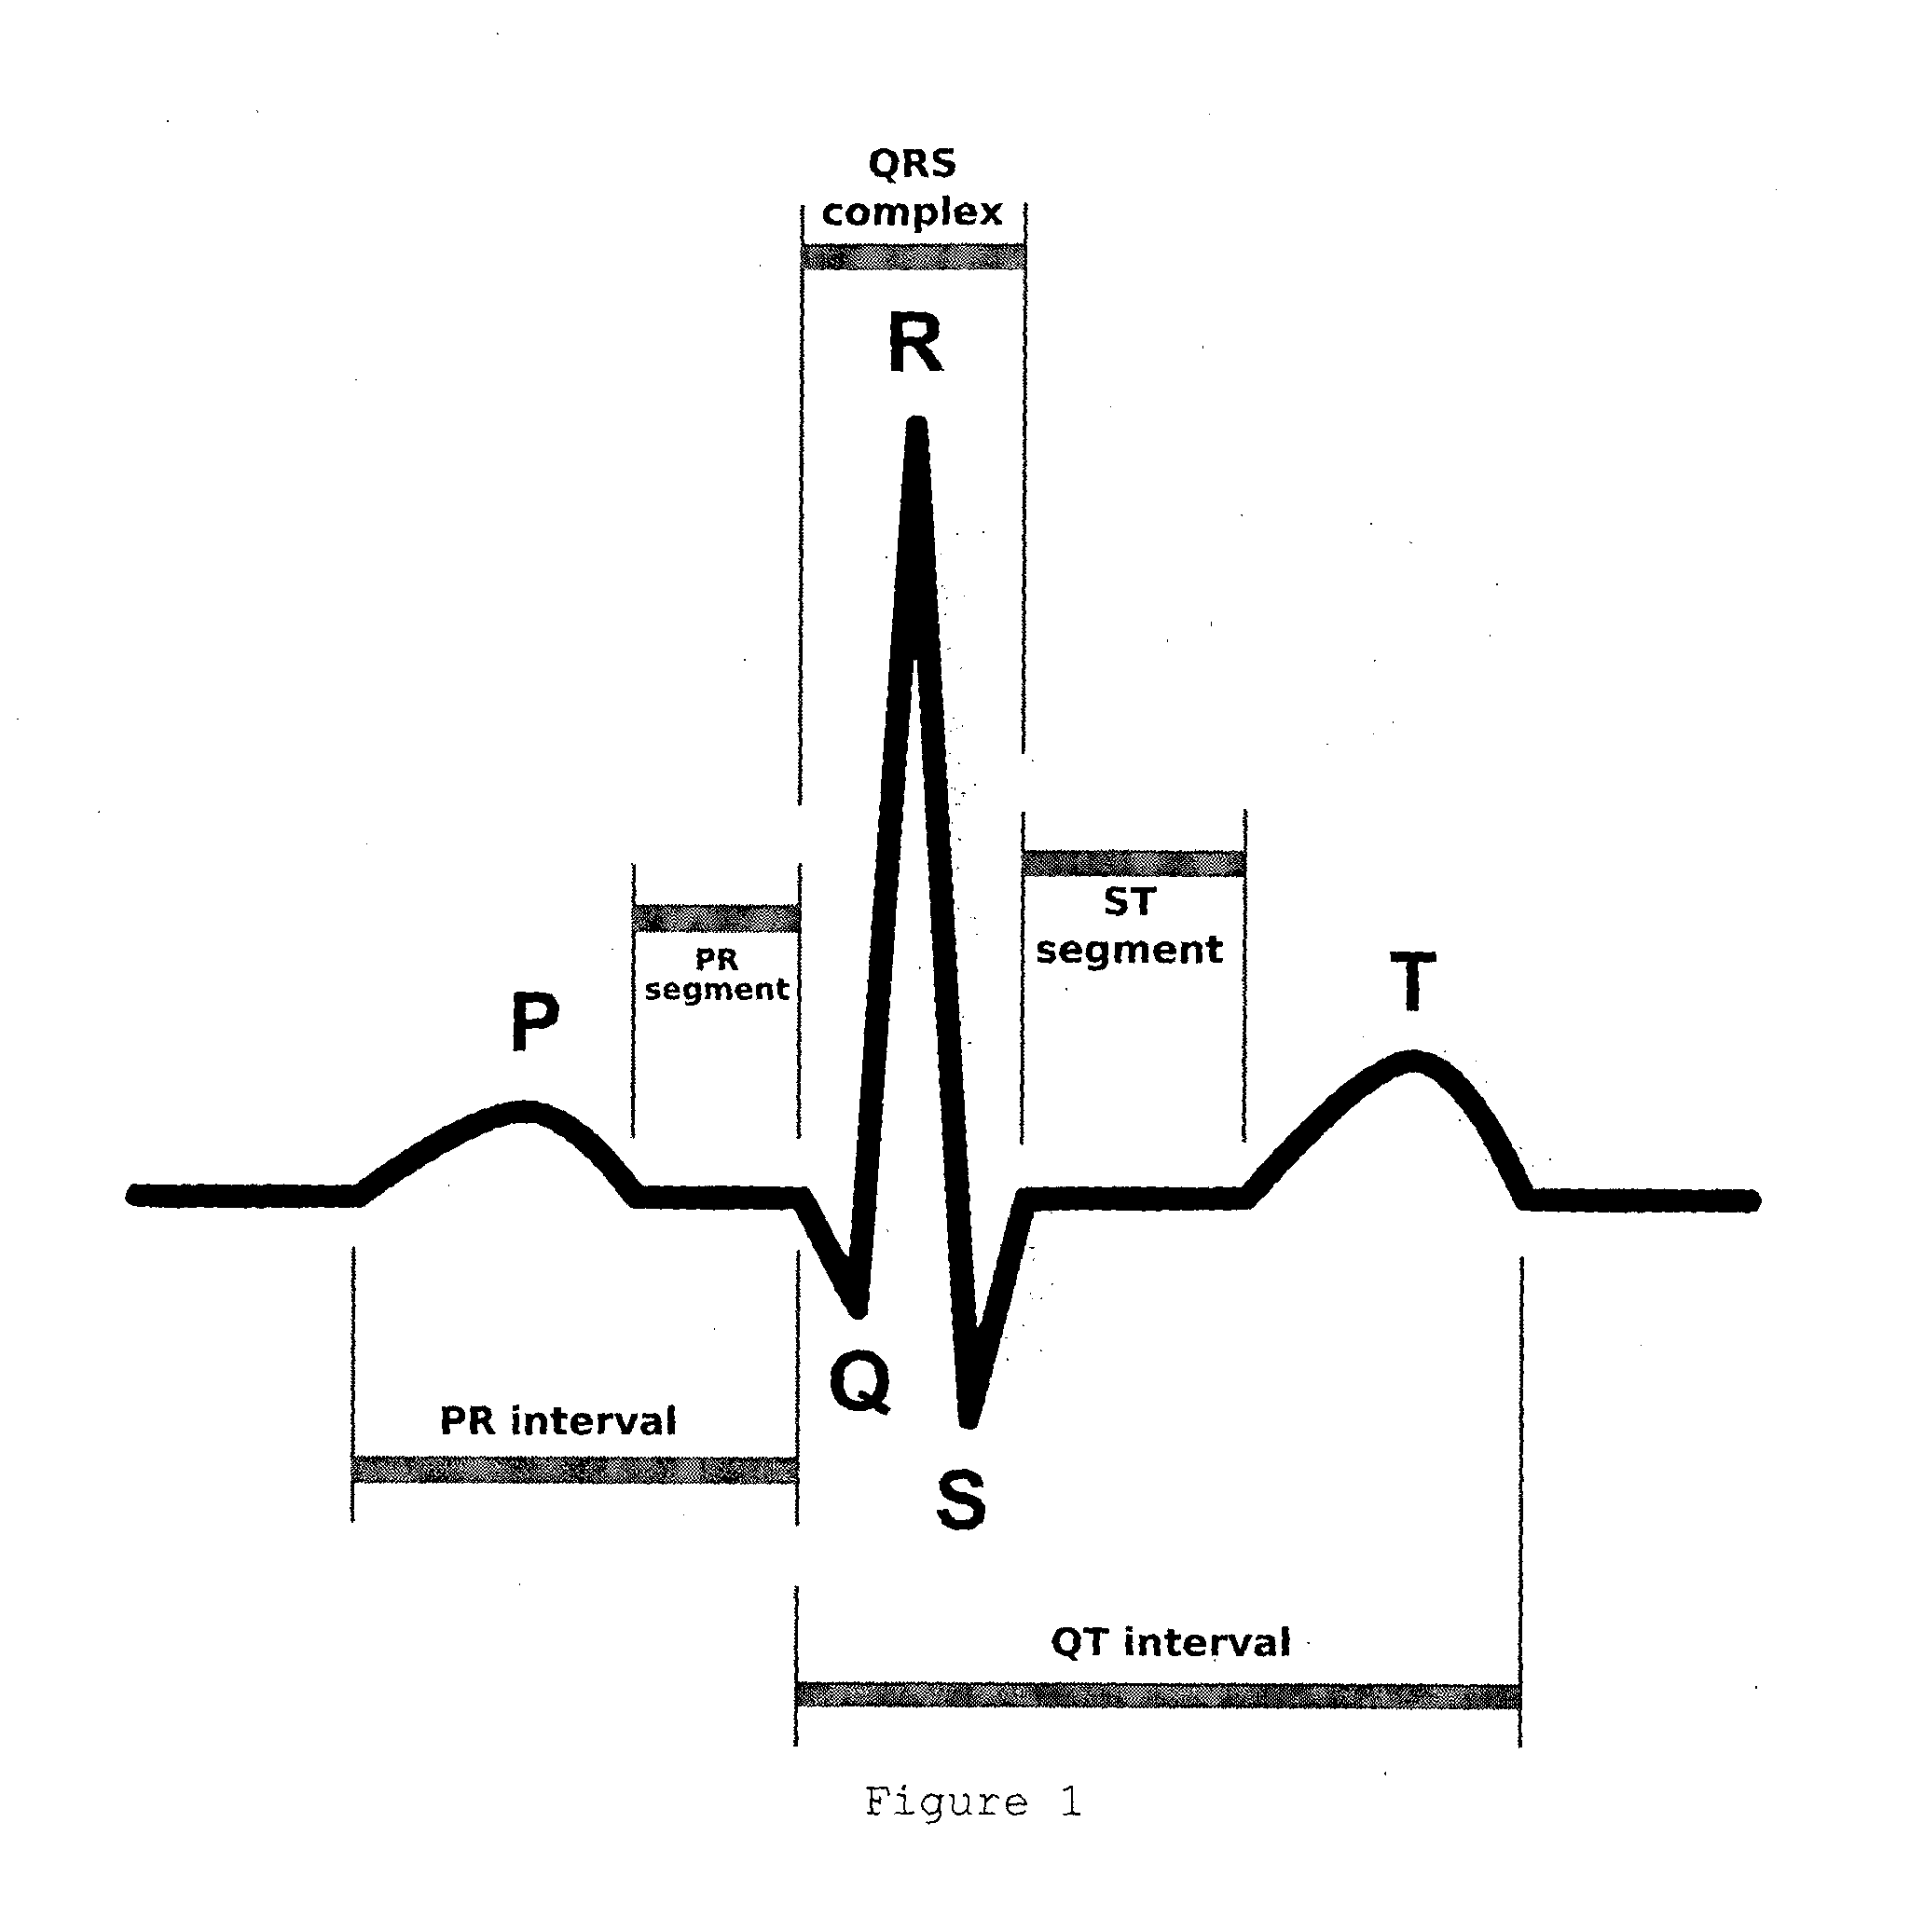 Device and method for continuous biometric recognition based on electrocardiographic signals